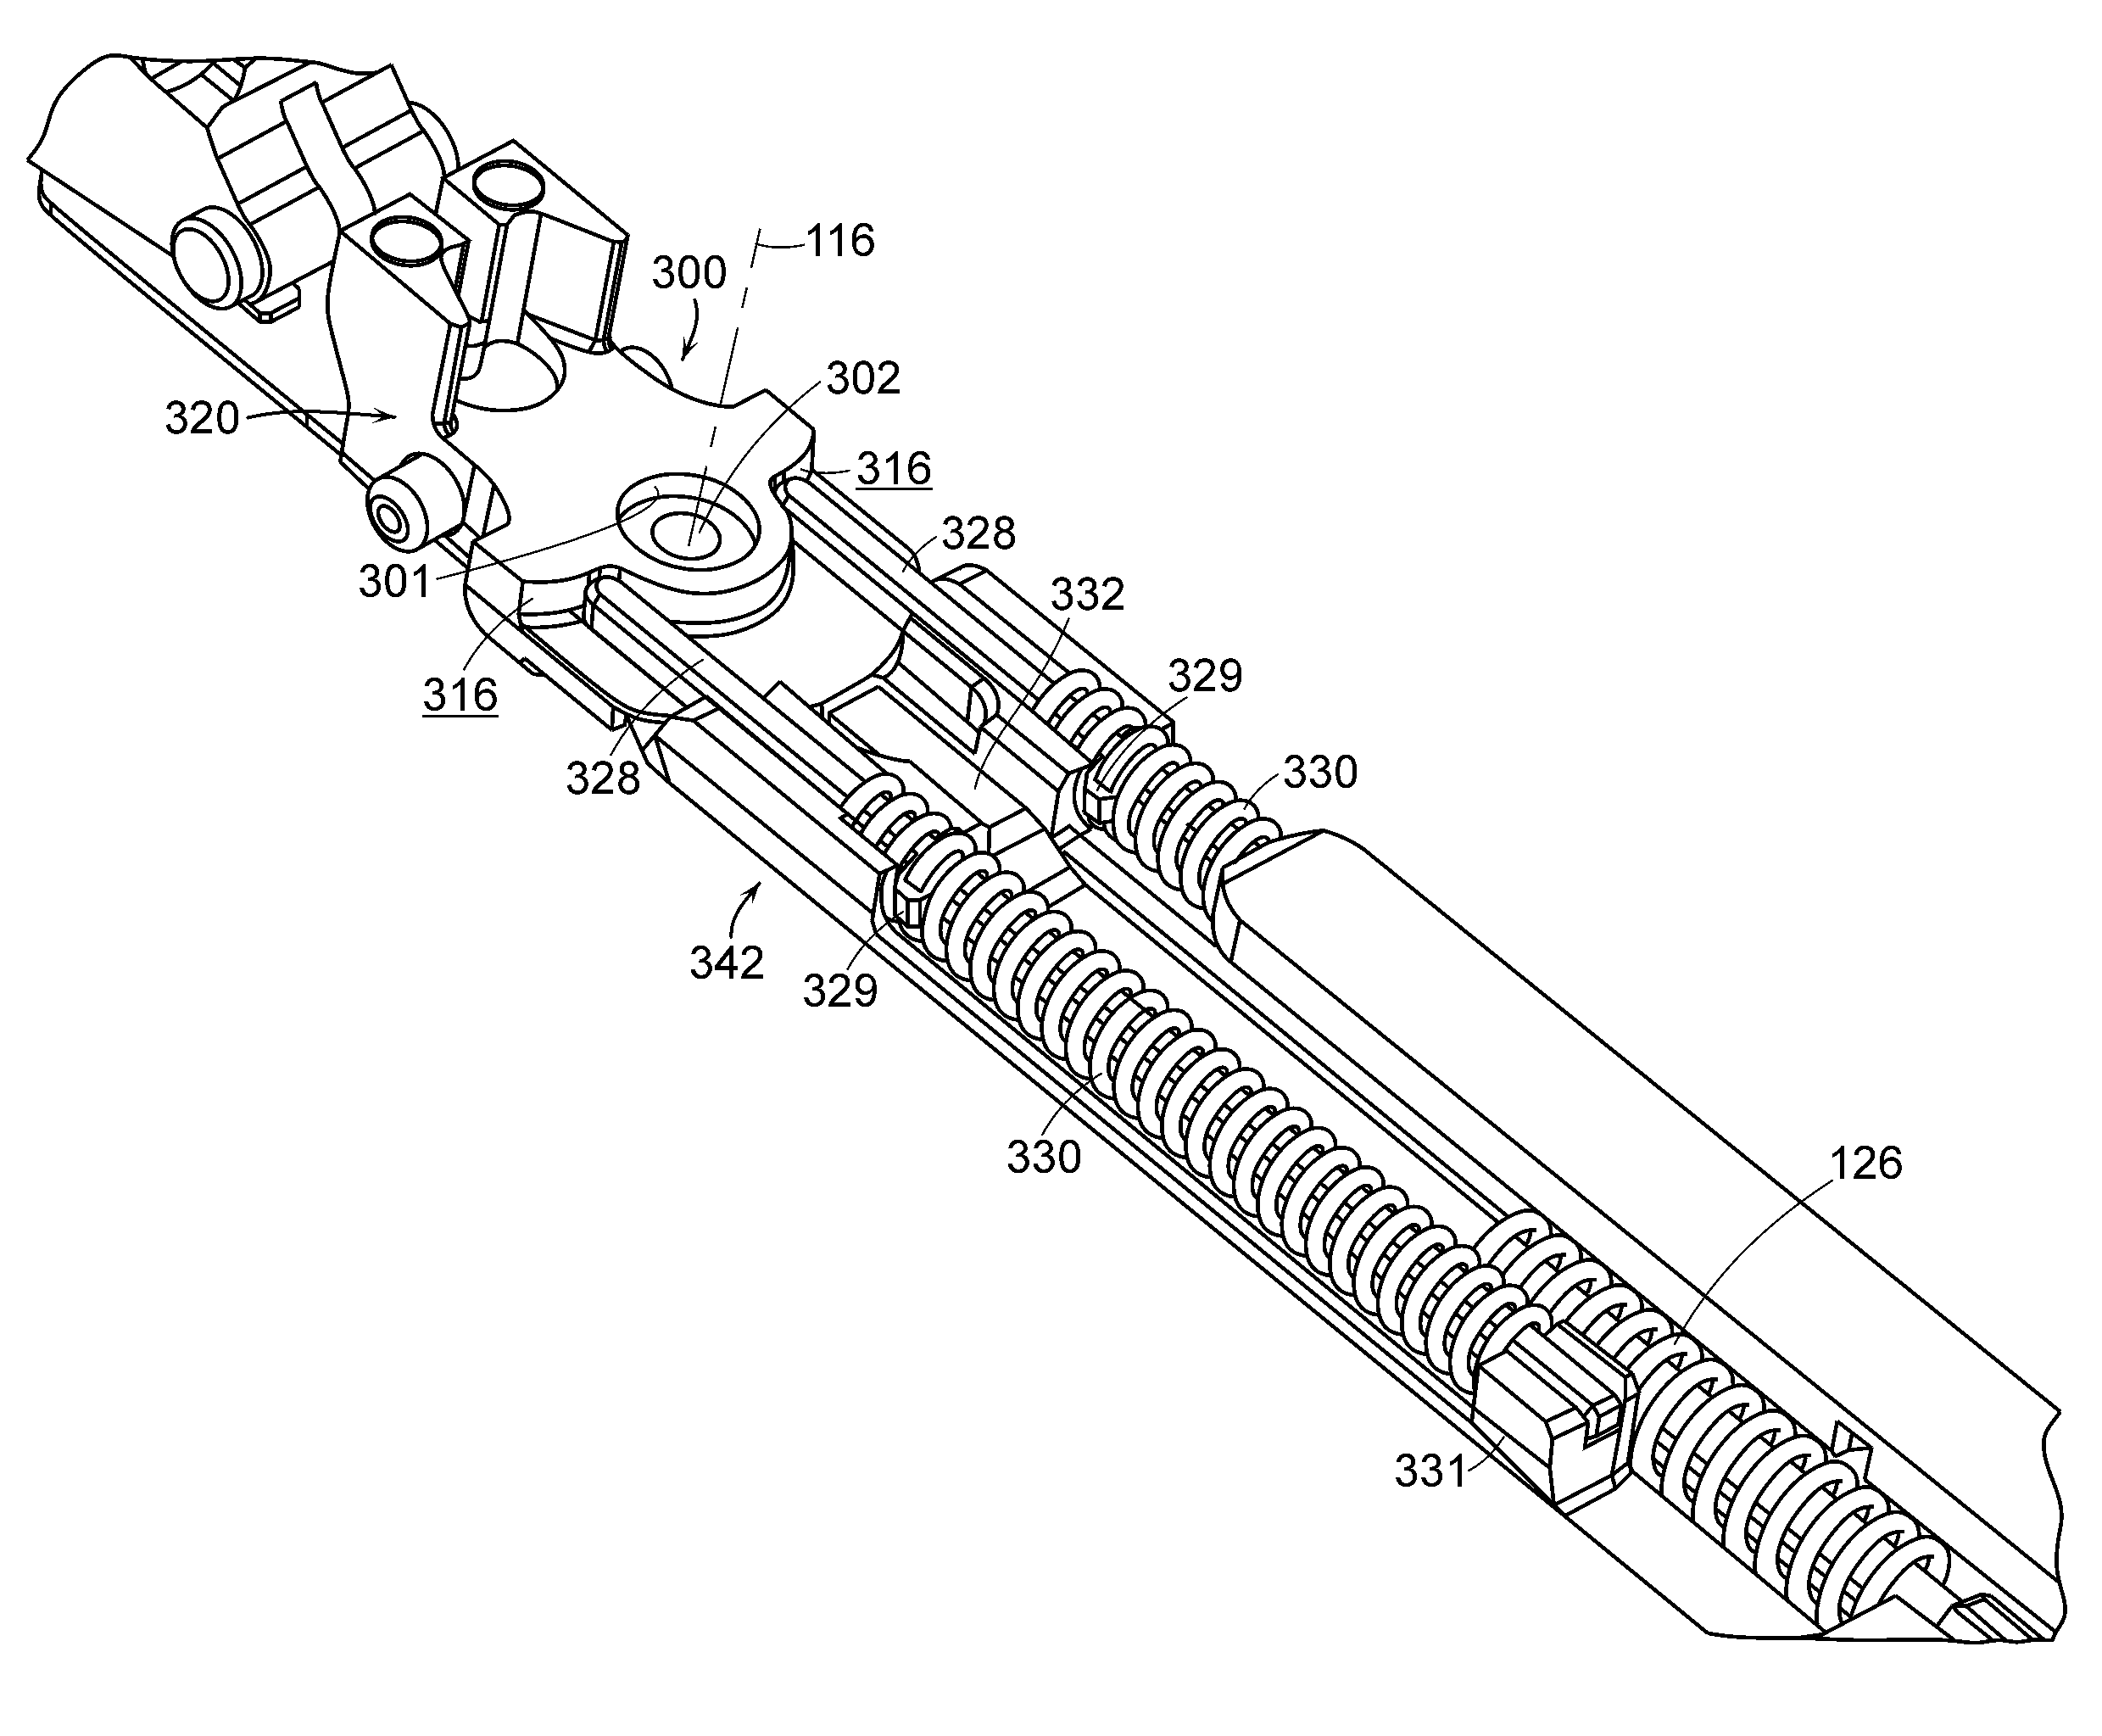 Surgical stapling instrument with an articulating end effector